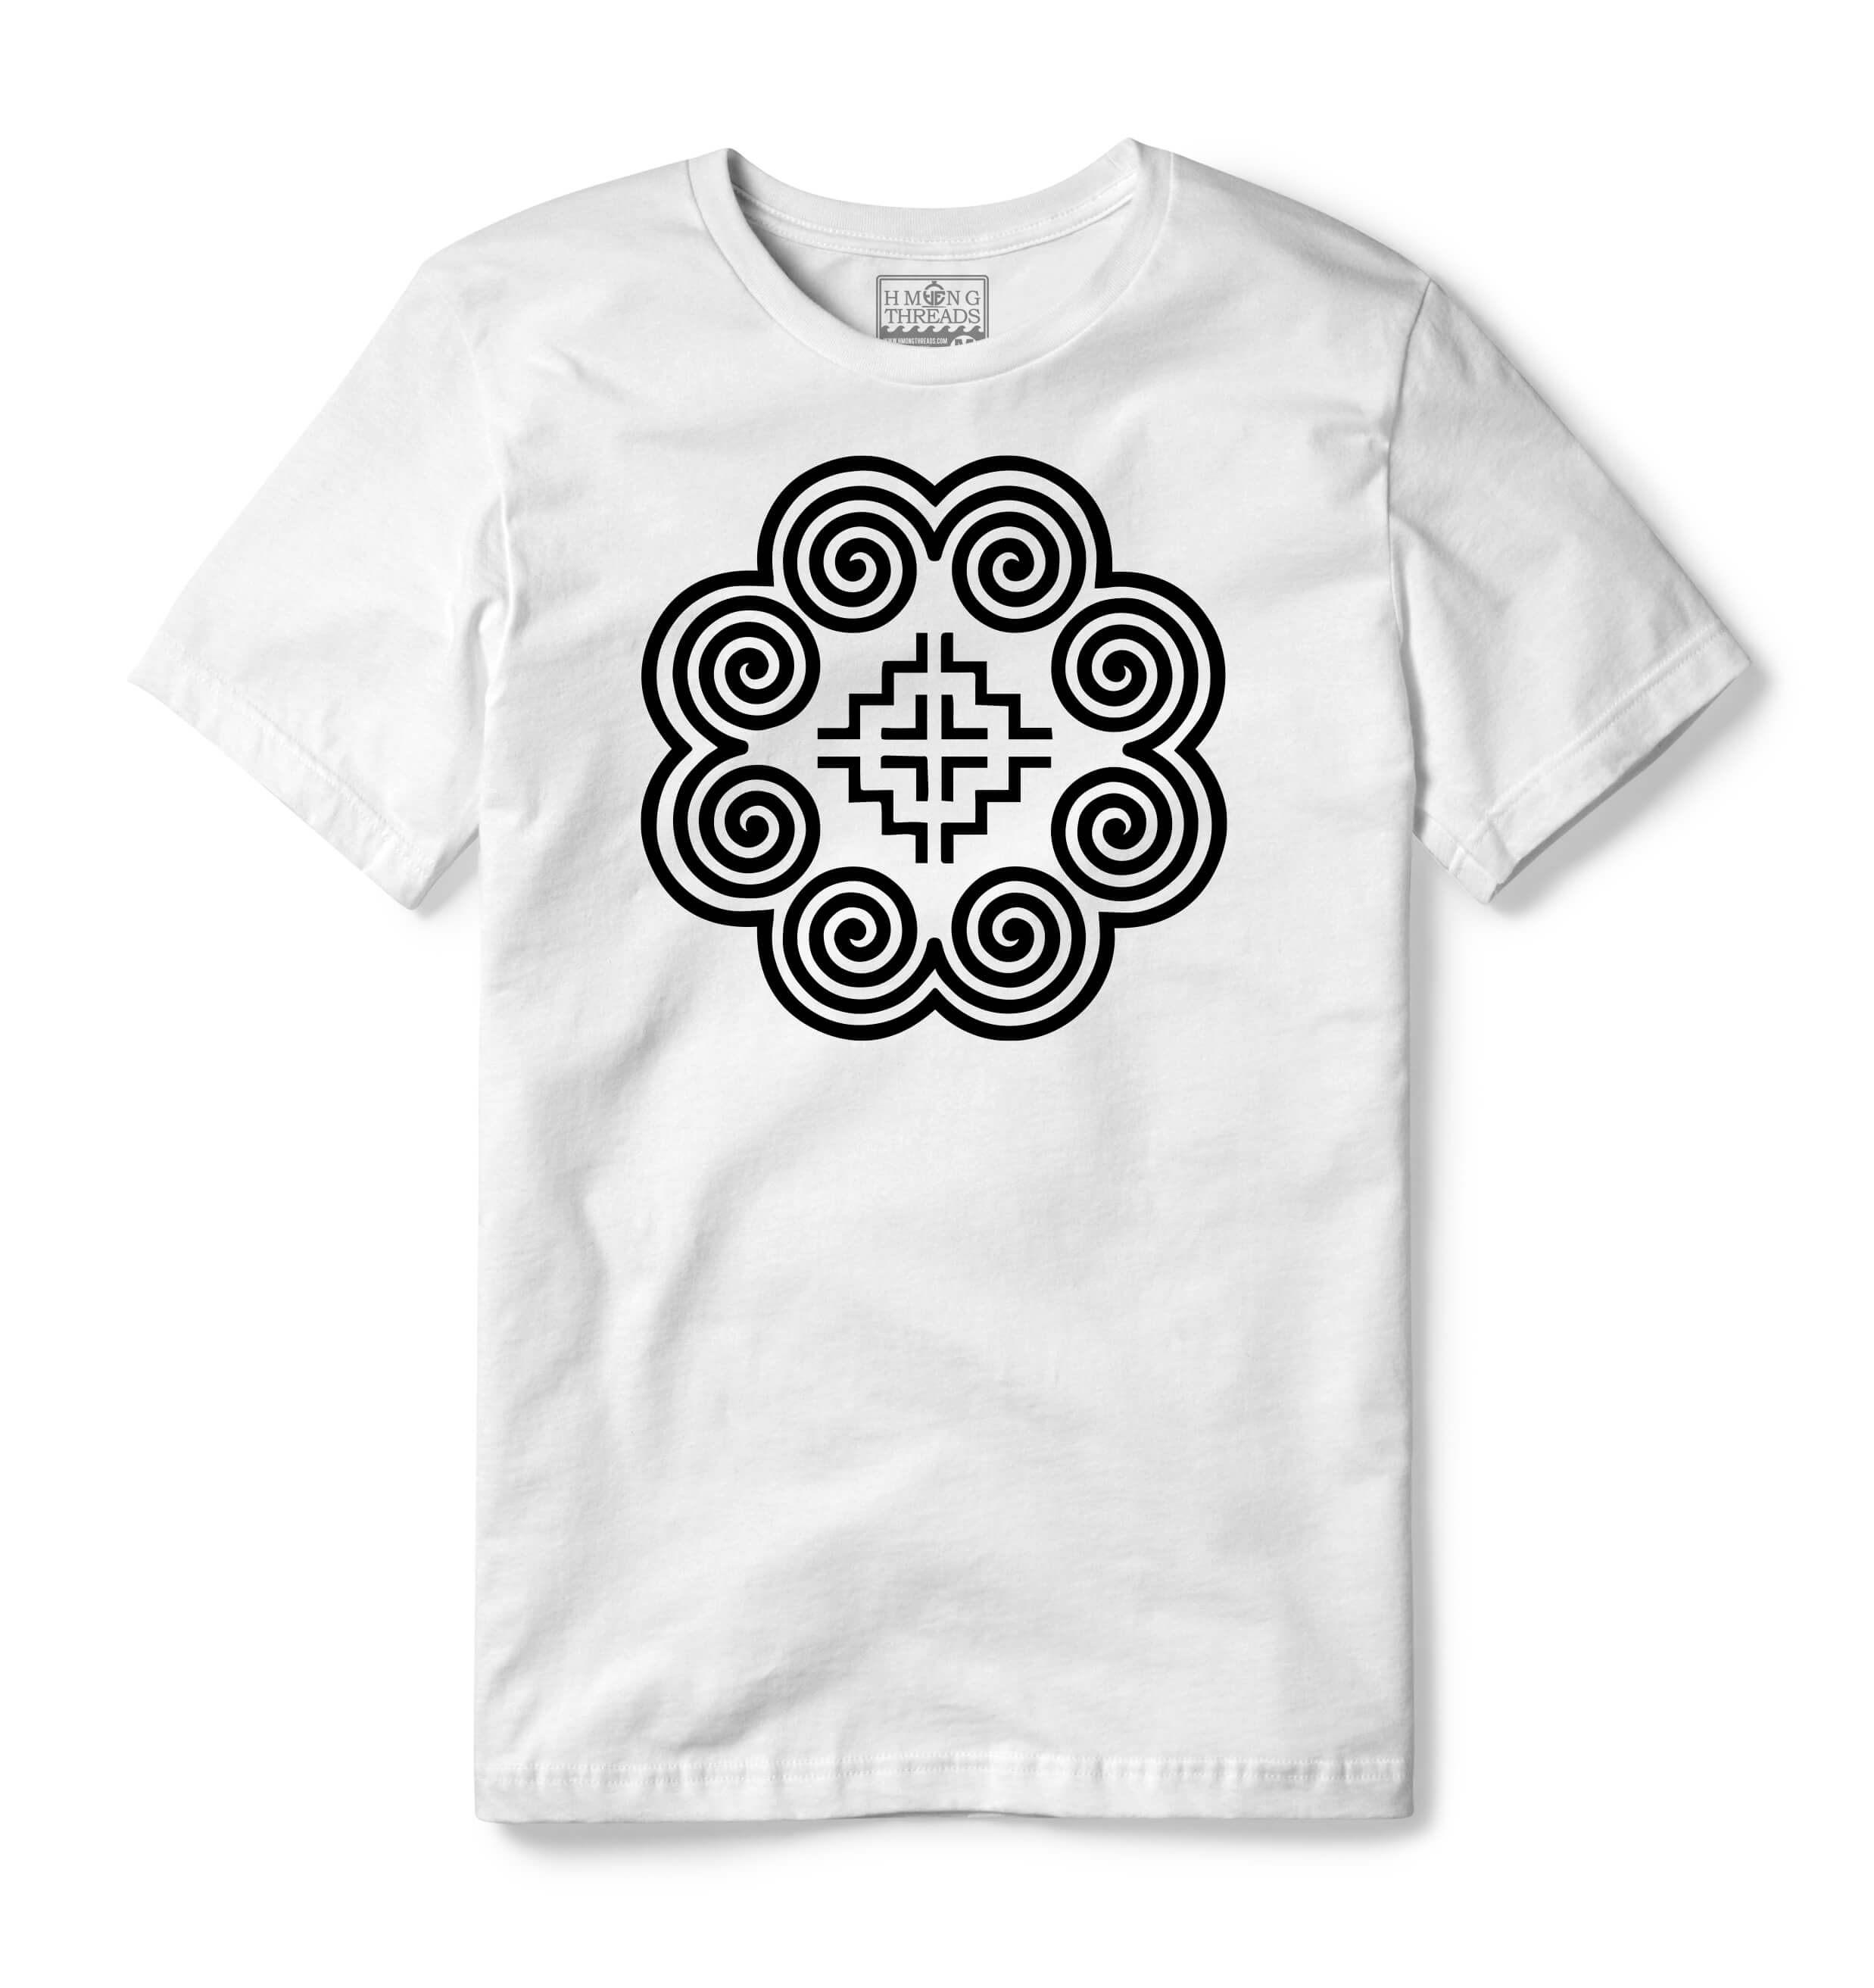 HMONG EMBROIDERY PROSPERITY WHITE T-SHIRT